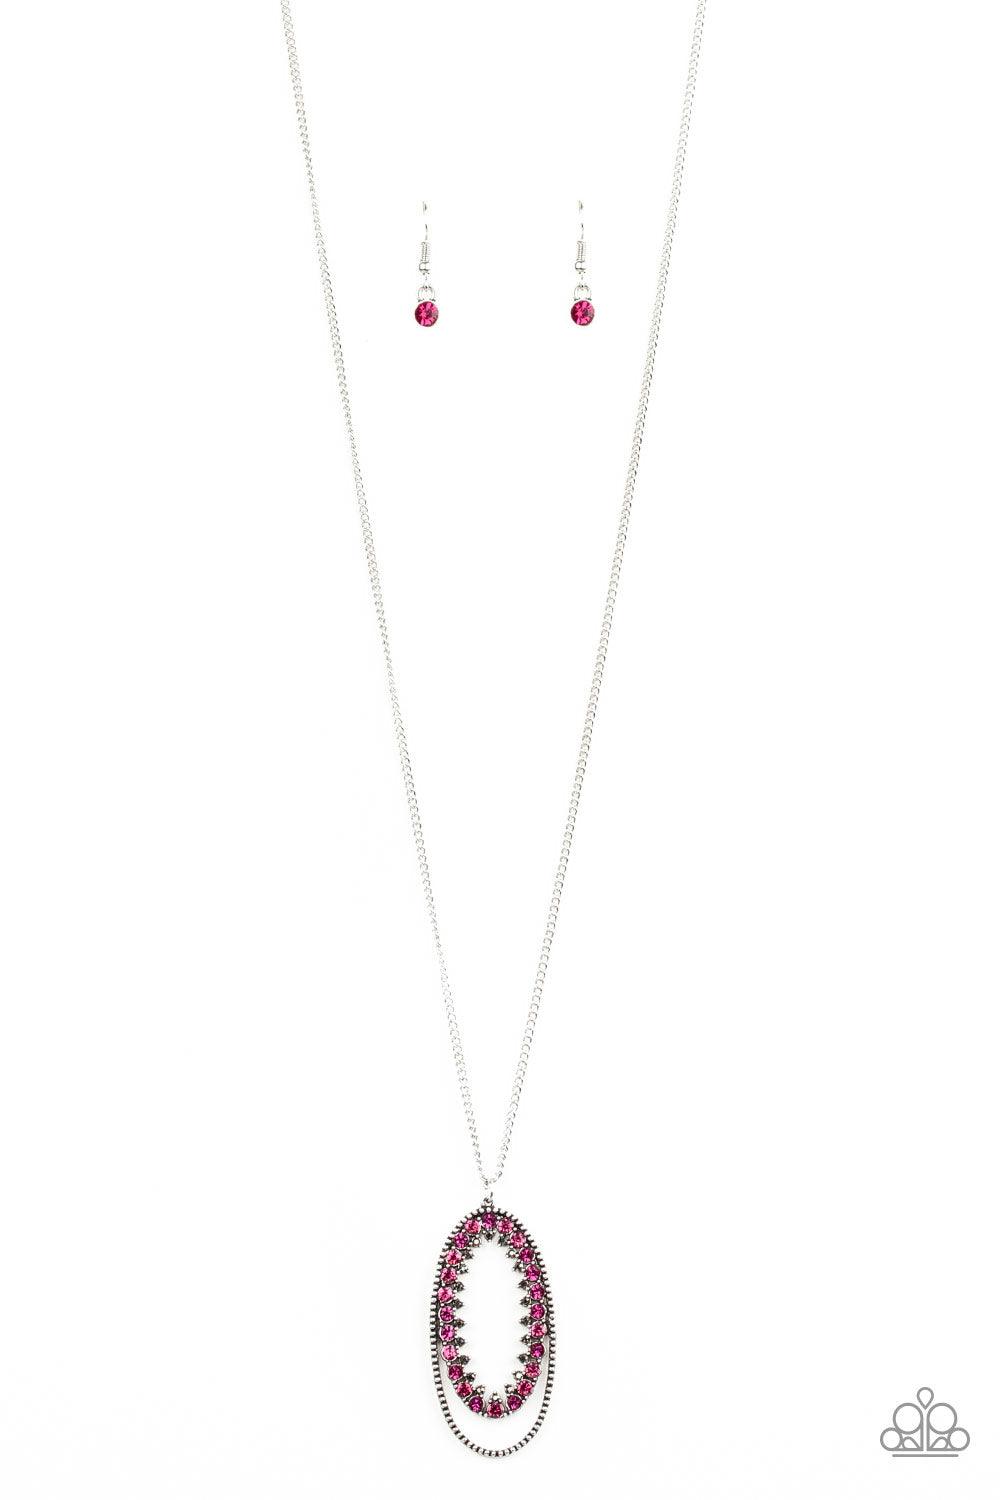 Paparazzi Accessories Money Mood - Pink Ringed in a studded silver frame, glittery pink and hematite rhinestones collect into a glamorous pendant at the bottom of a lengthened silver chain for a refined flair. Features an adjustable clasp closure. Sold as